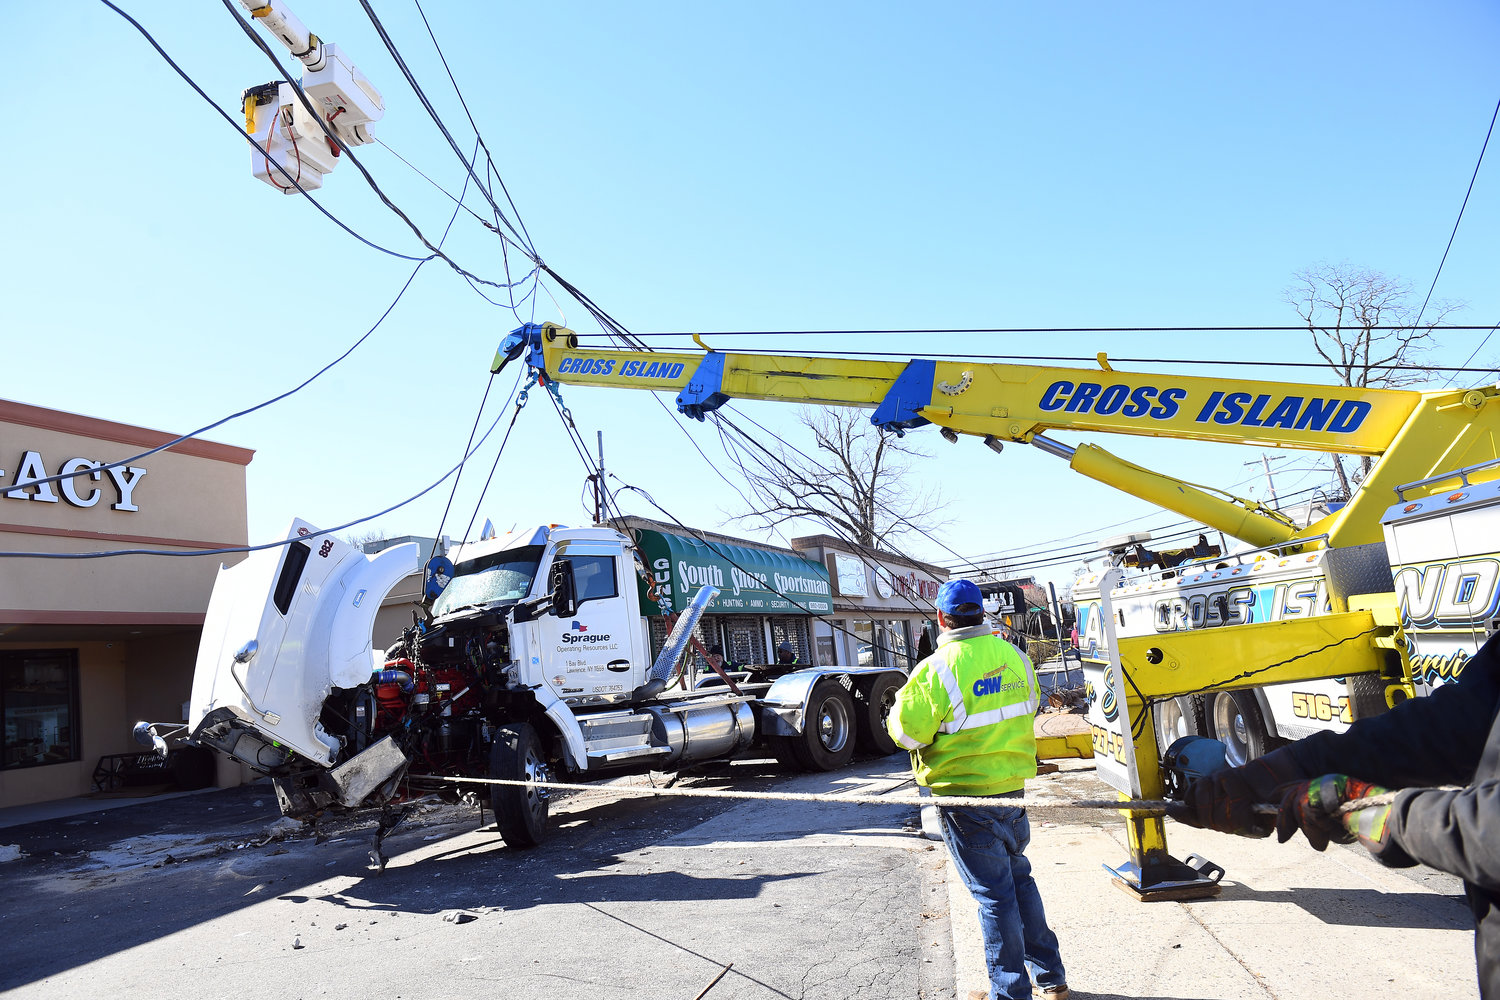 The Nassau County Police Department, PSEG Long Island, and other cleanup crews were on the scene this morning, assessing damage and diverting traffic. The truck, pictured, was carefully lifted and removed from the scene sometime after 10 a.m.